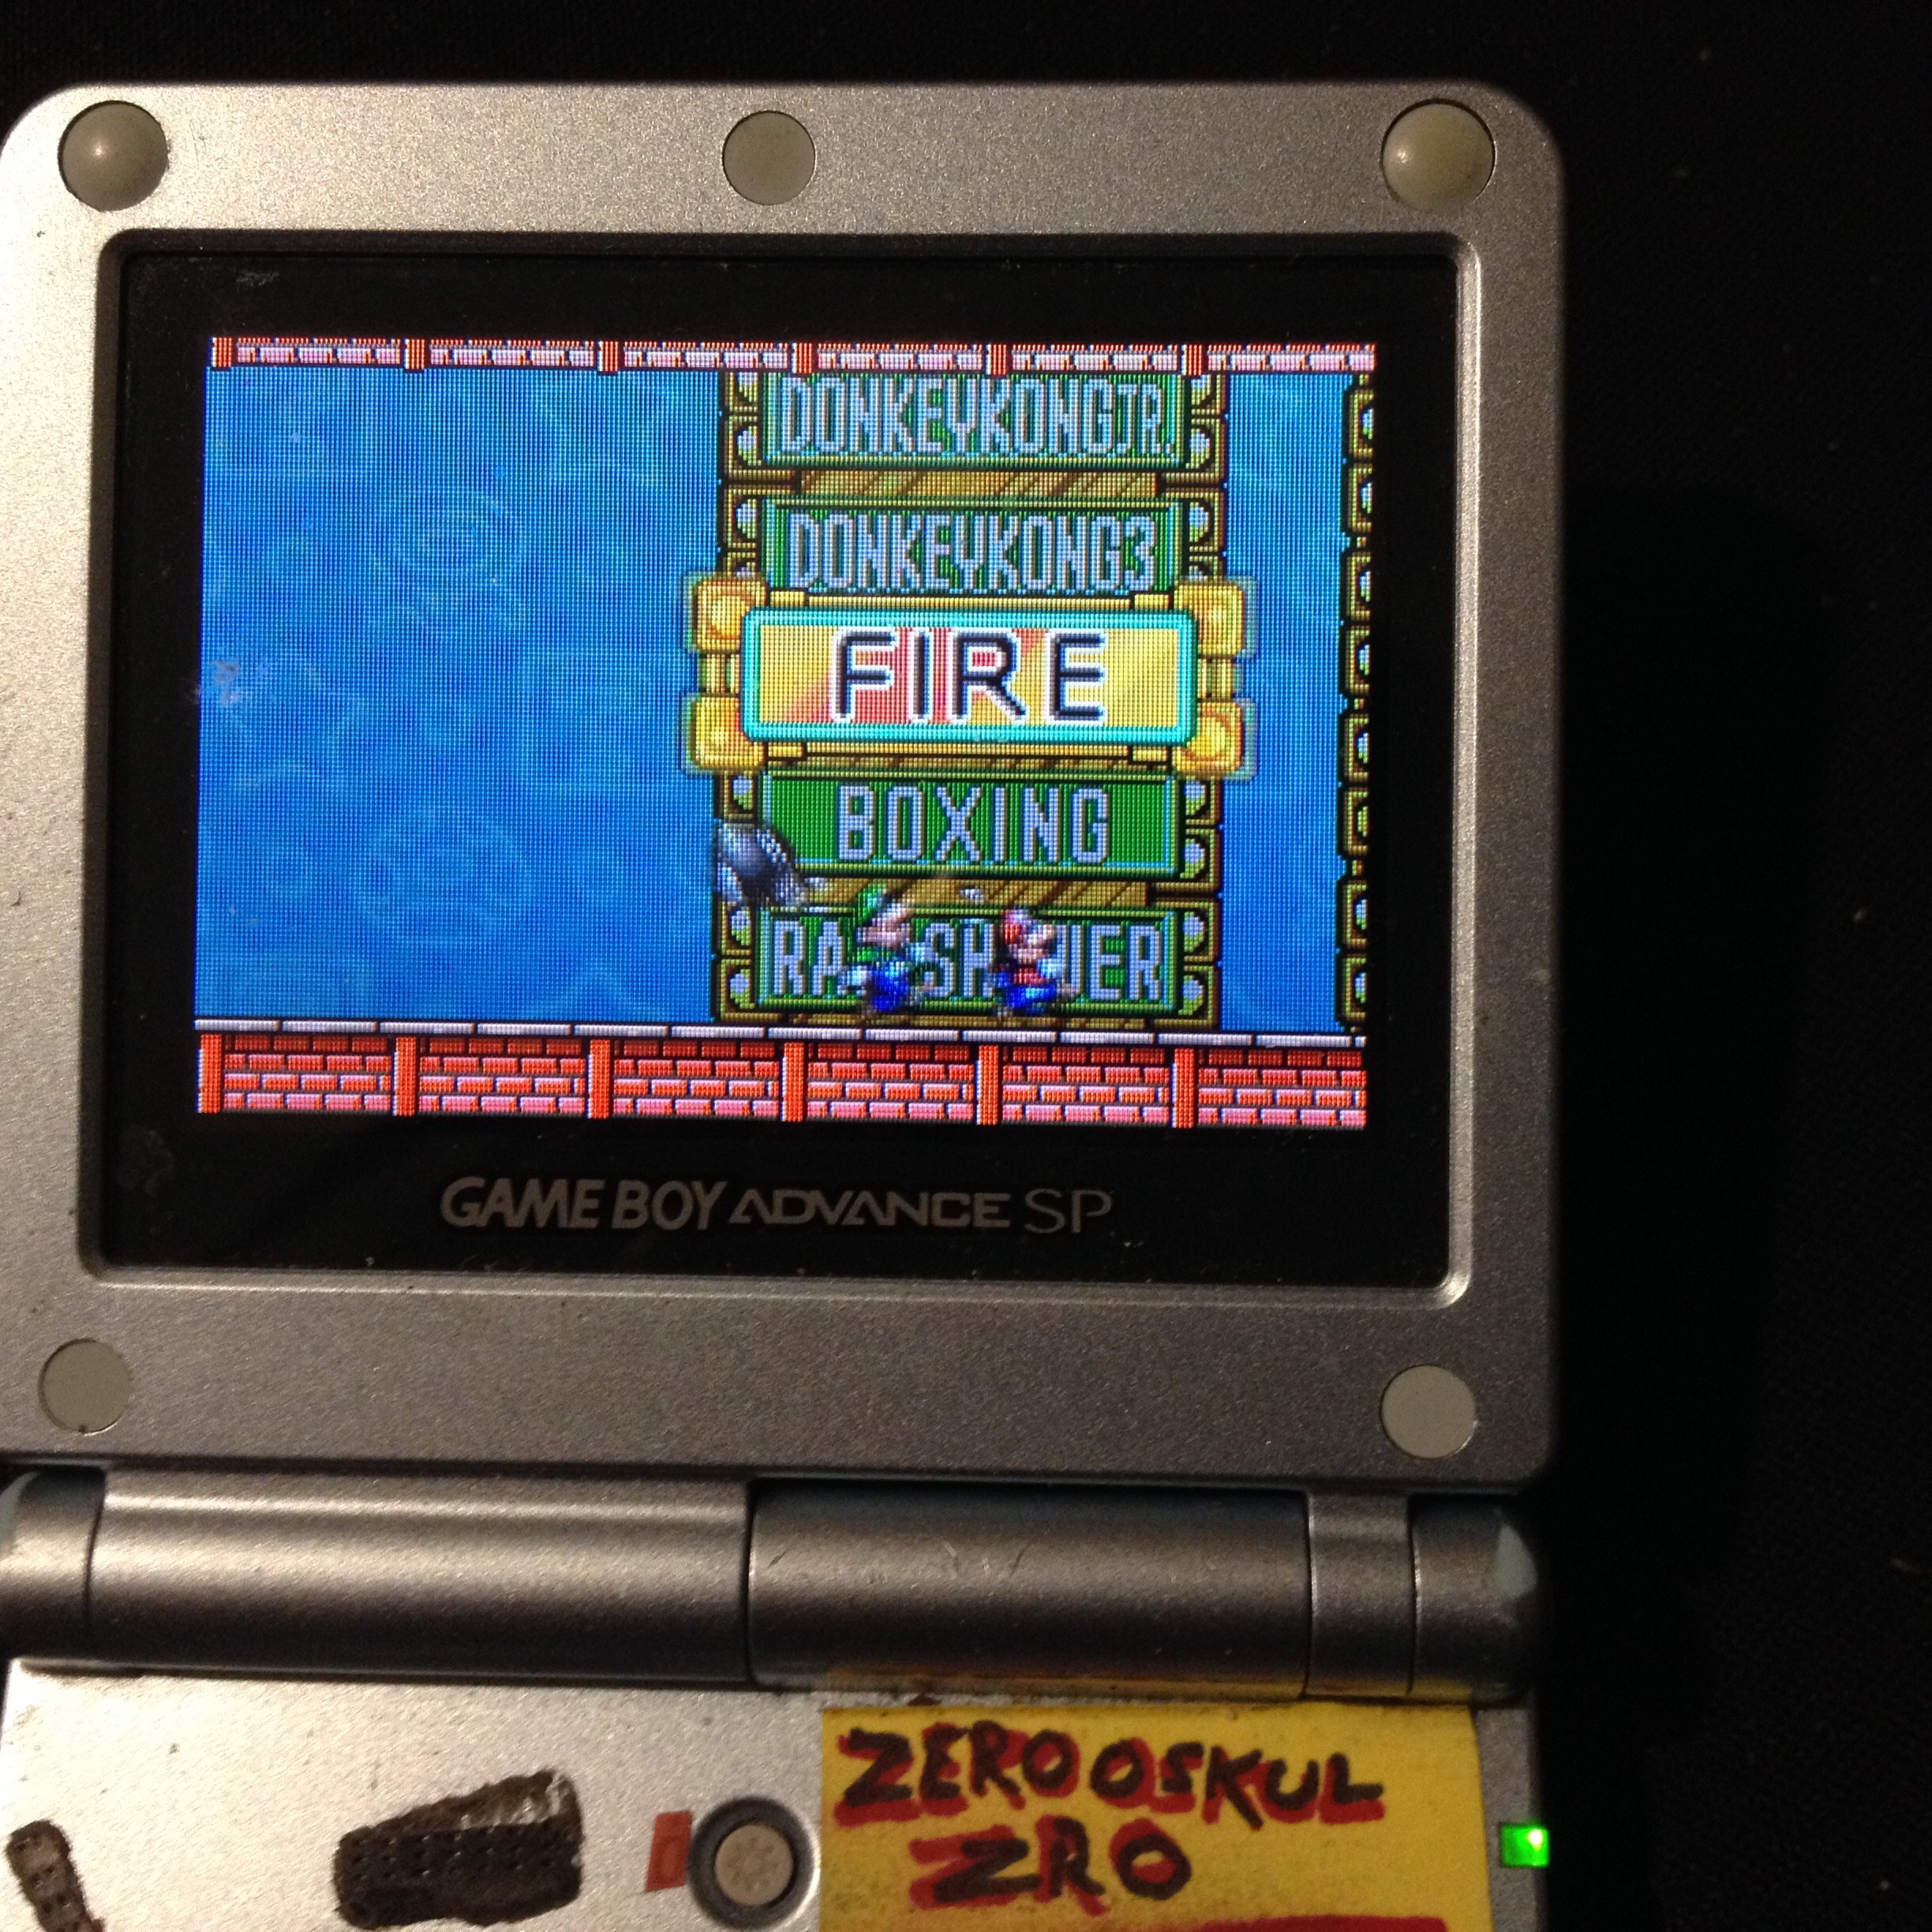 zerooskul: Game & Watch Gallery 4: Fire [Classic: Easy] (GBA) 869 points on 2019-12-14 22:39:54